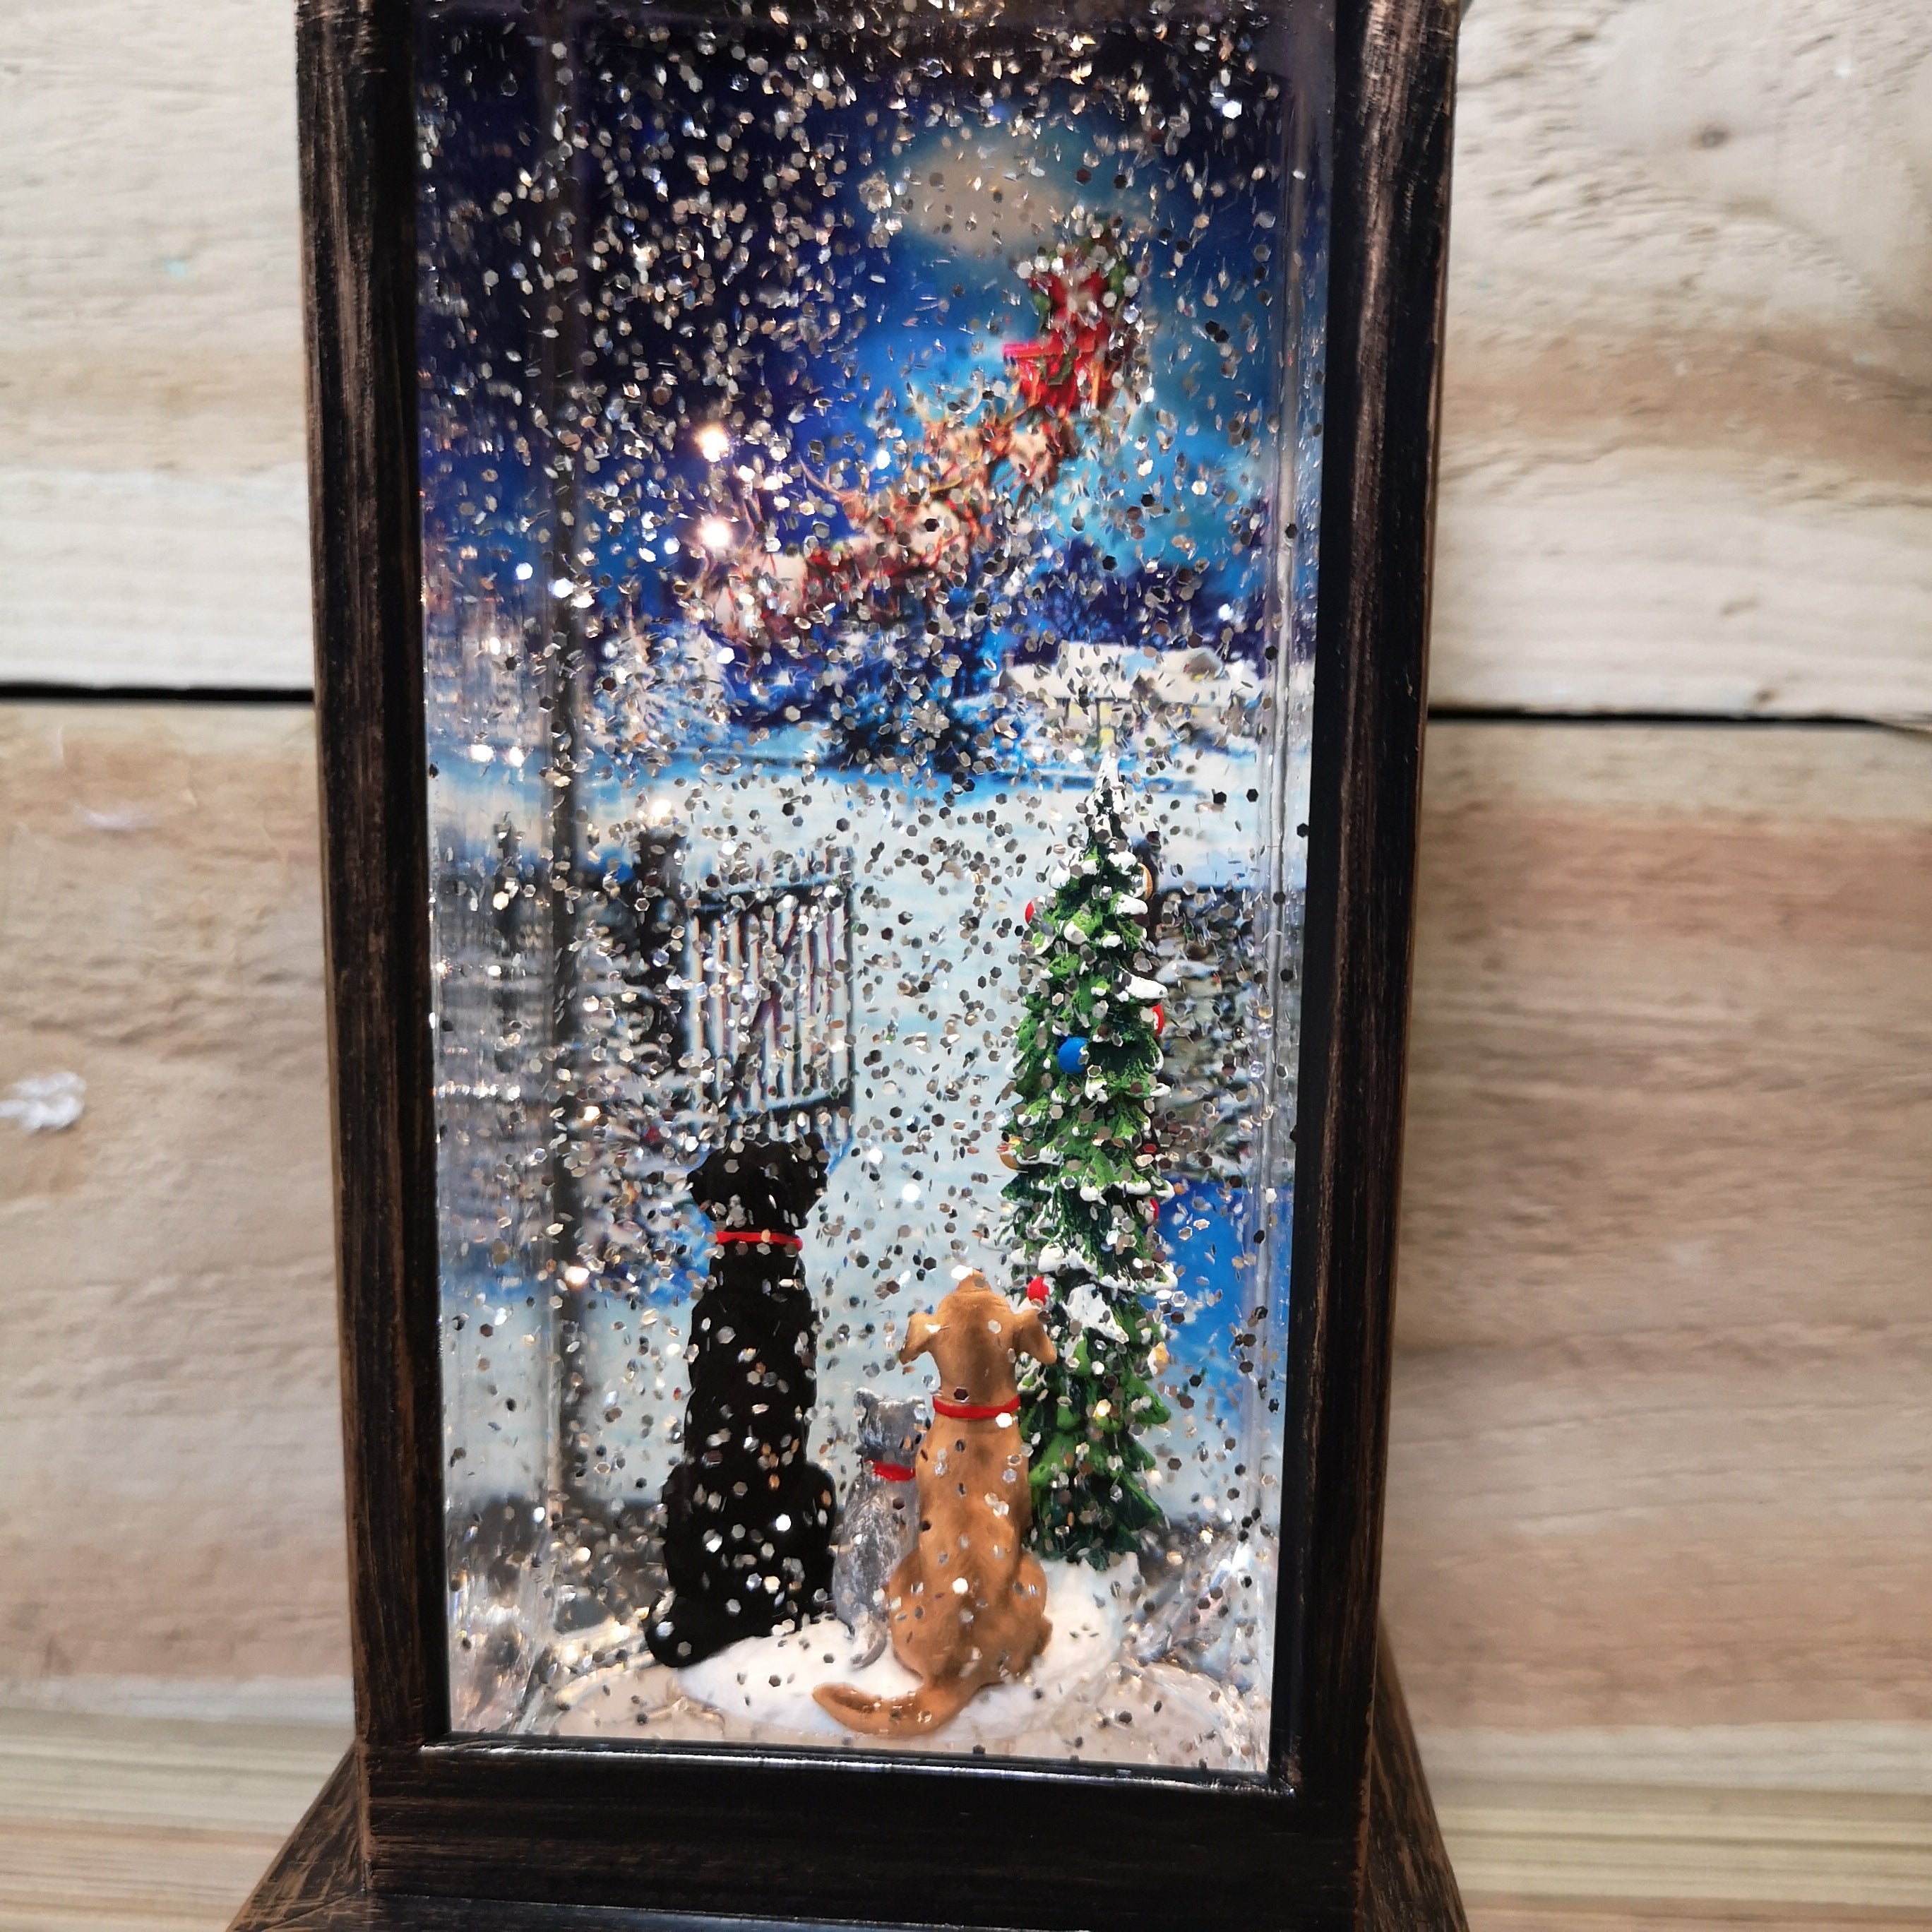 Snowtime Dual Power LED Water Lantern with Macneil 'Cats & Dogs Watching Santa' Scene